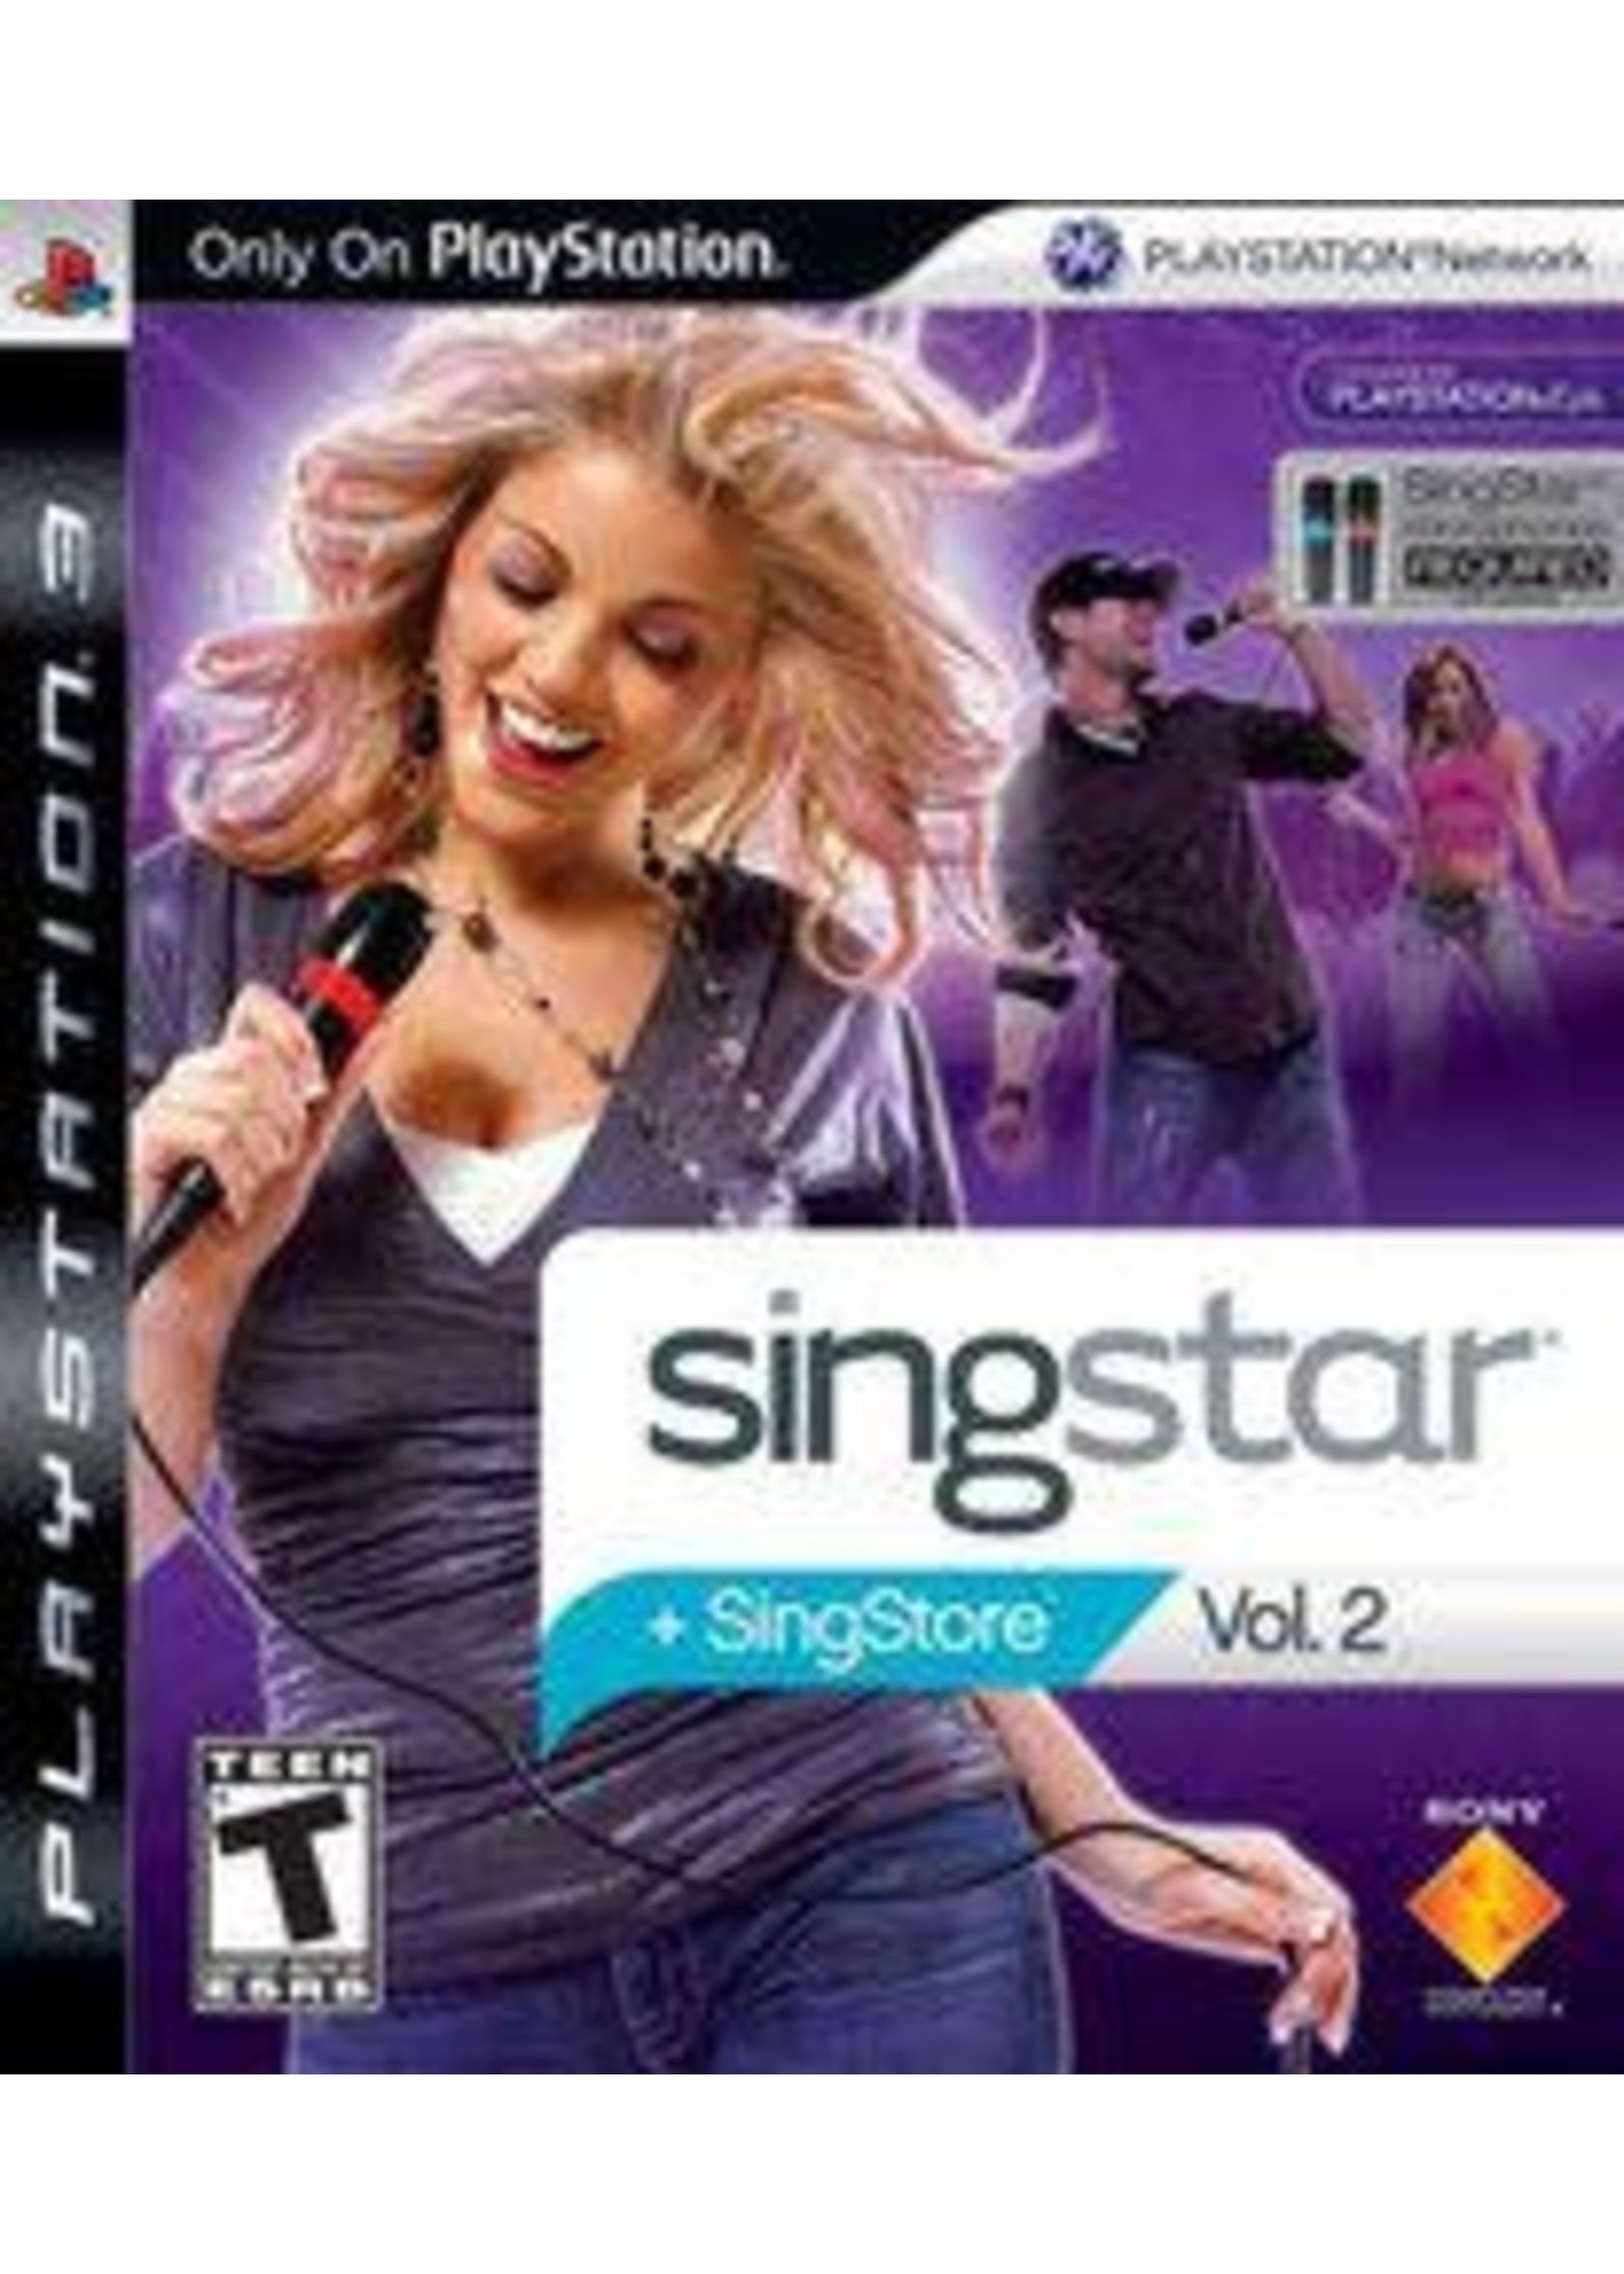 SingStar Vol. 2 (Game Only) Playstation 3